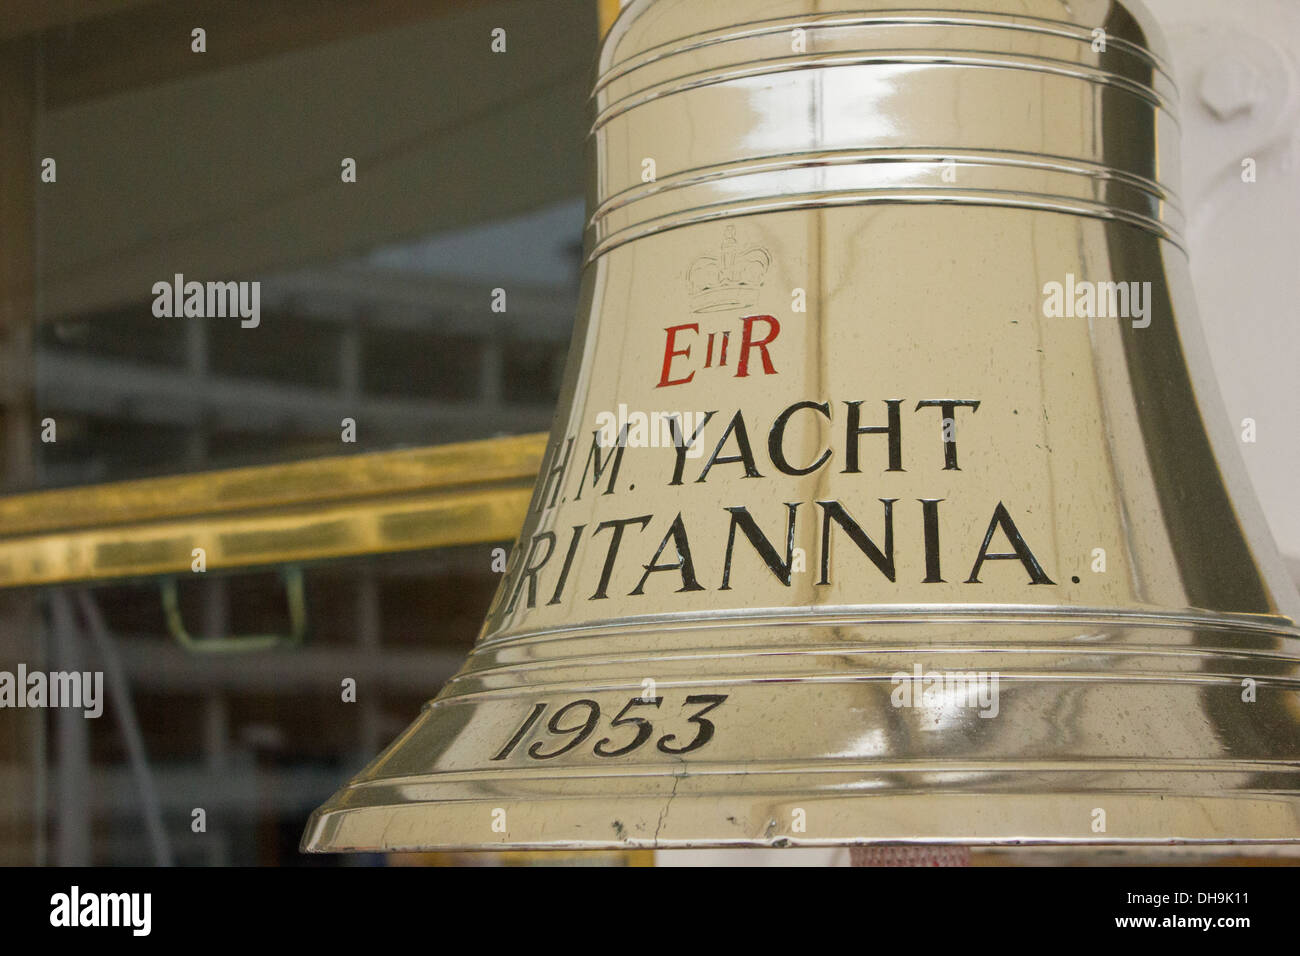 The bell on The Royal Yacht Britannia which is berthed in Edinburgh, Scotland. Stock Photo